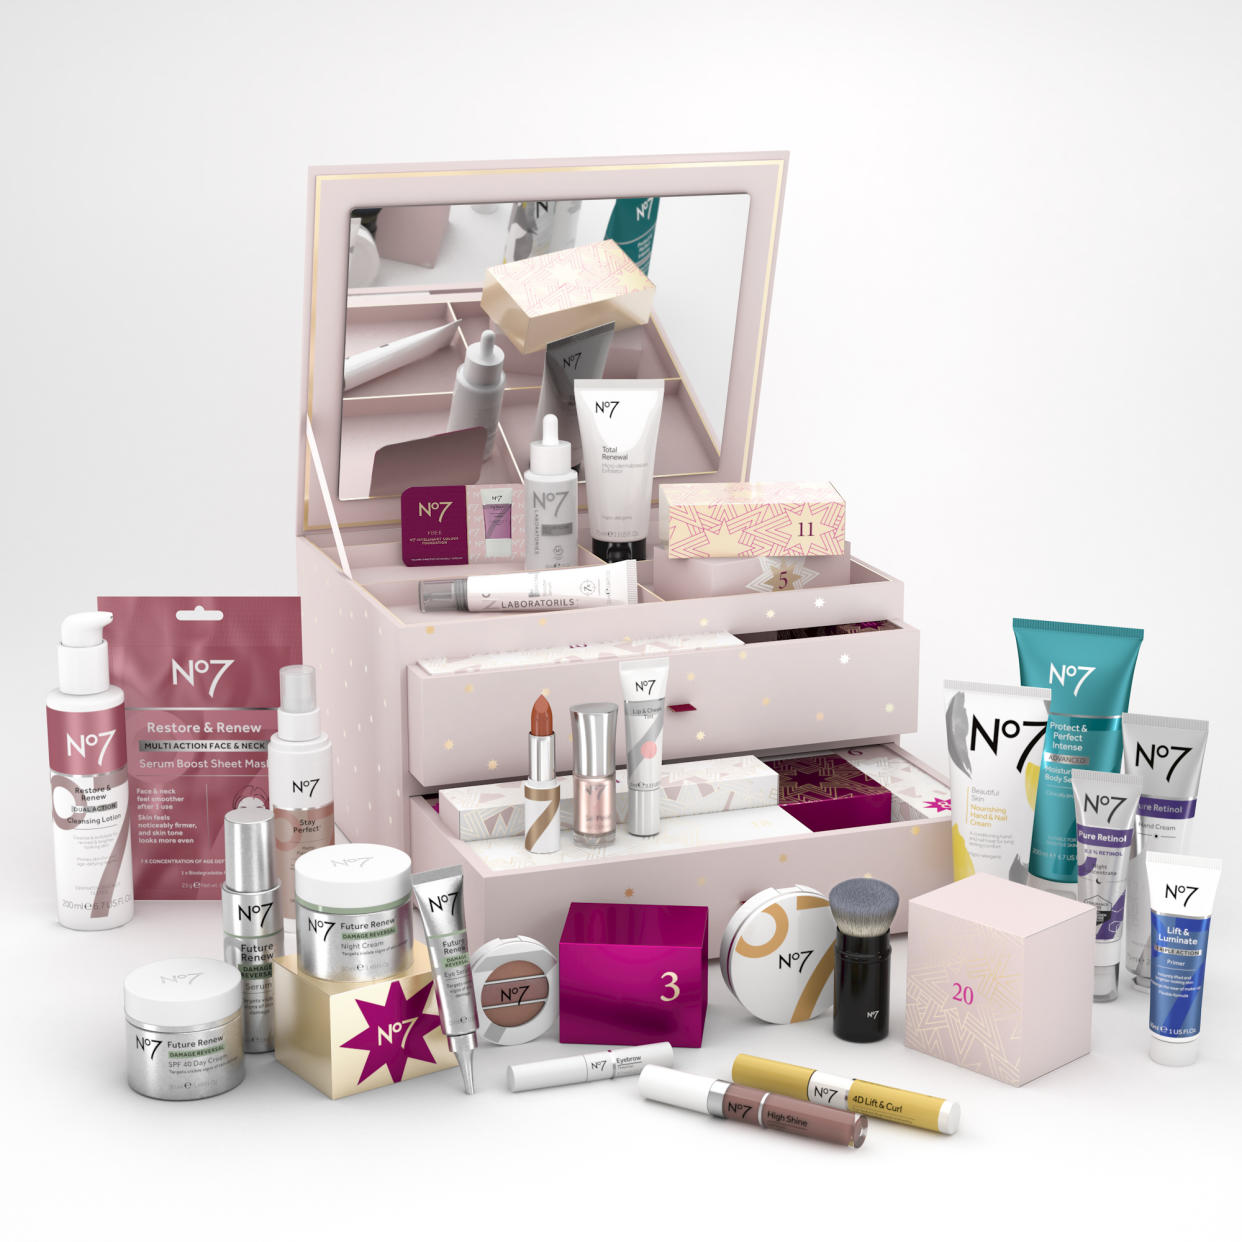 Christmas has come early with No7's Ultimate 25 Days of Beauty Advent Calendar. (No7 / Boots)